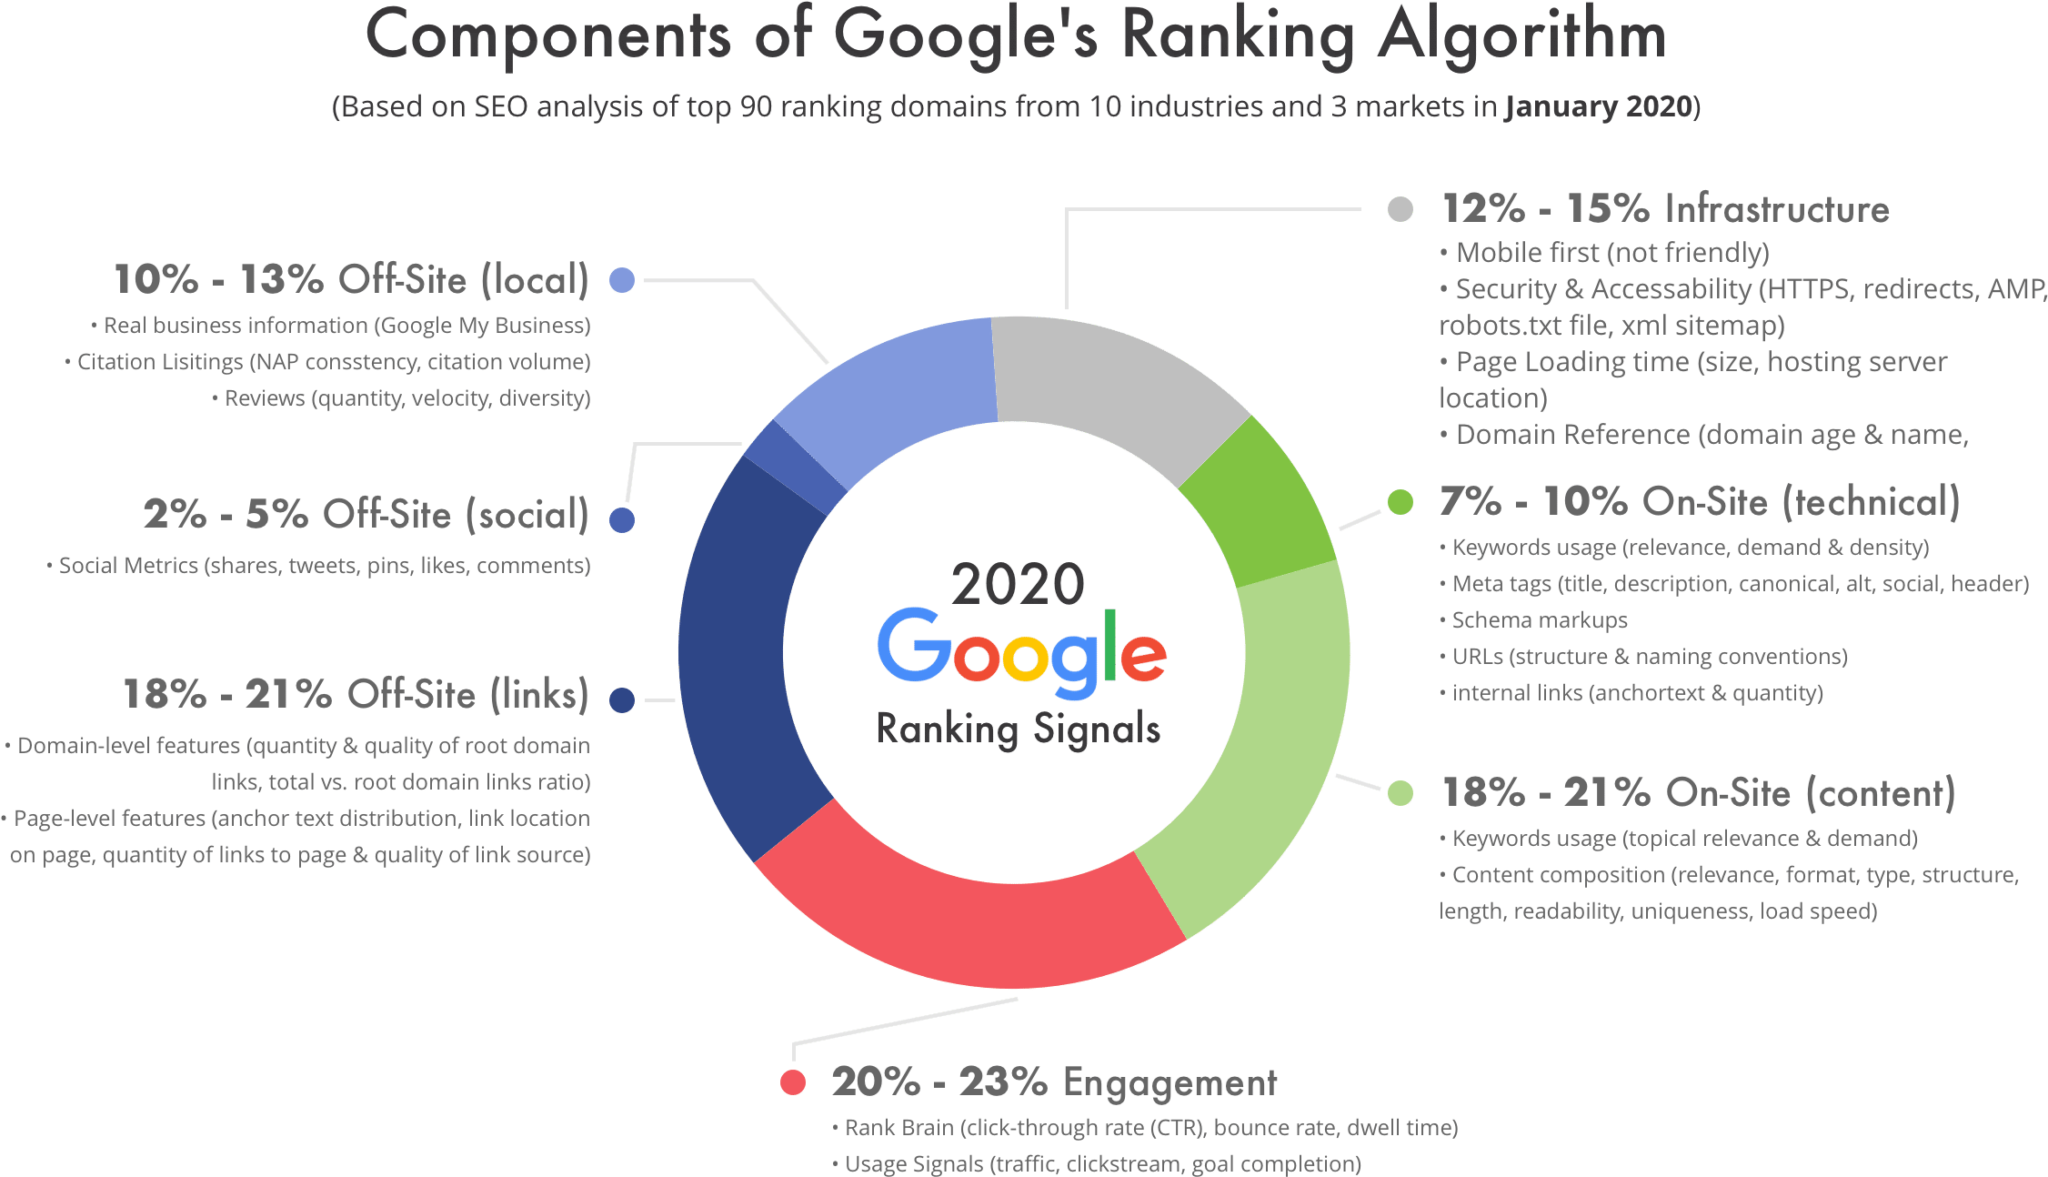 Responsive web design benefits your SEO - Google ranking factors that consider fast page speed load